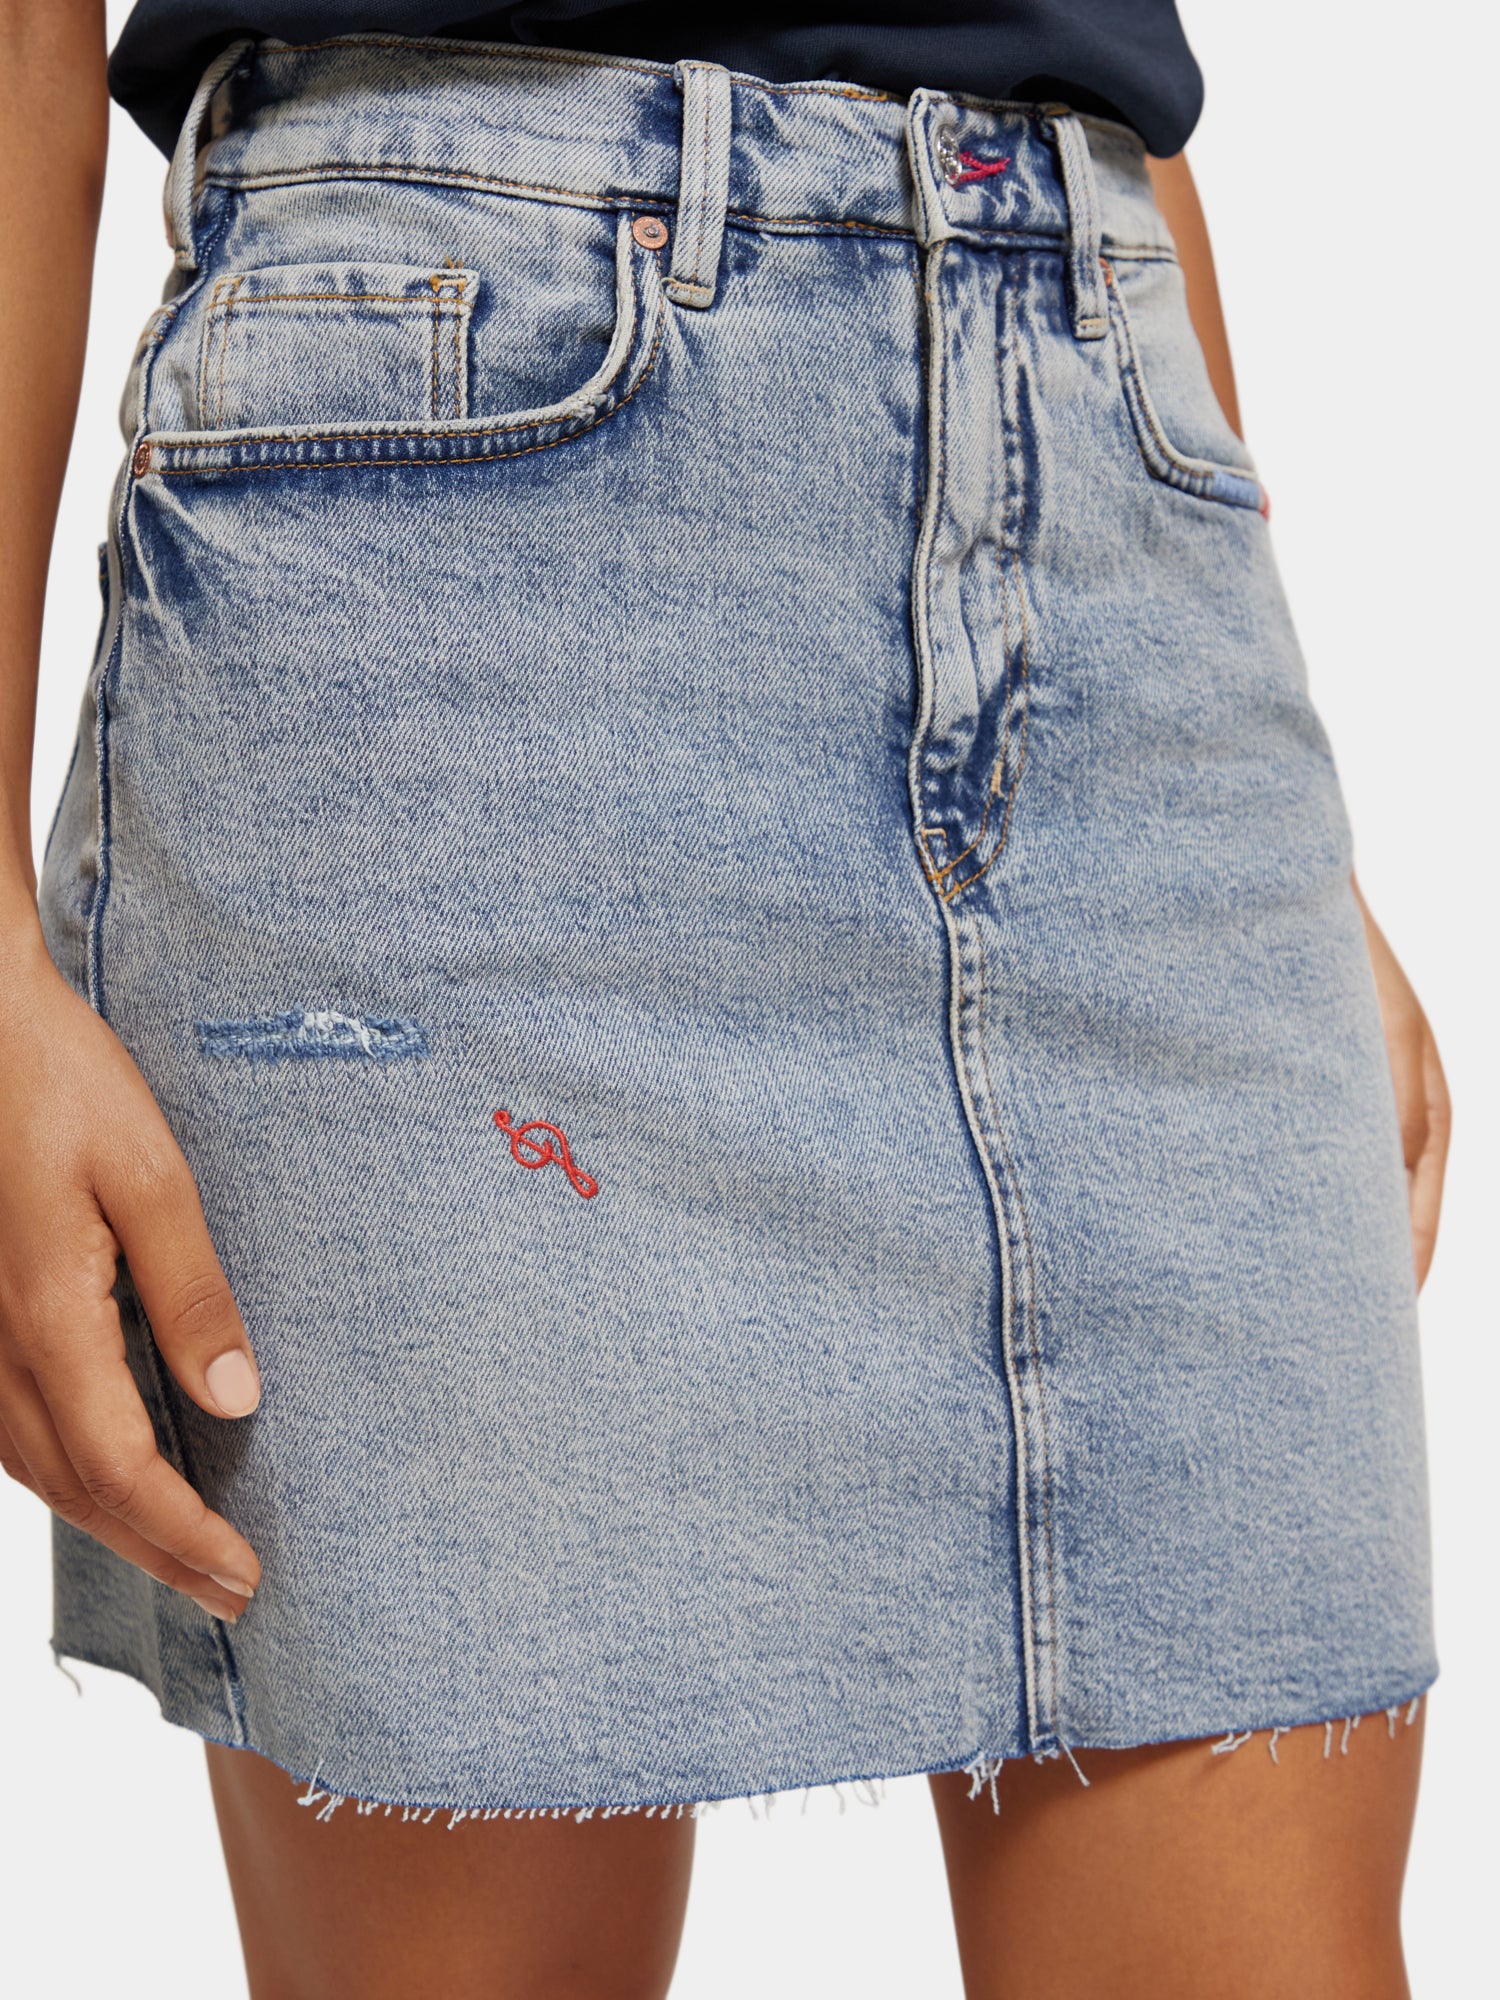 Embroidered denim mini skirt - Dance It Out